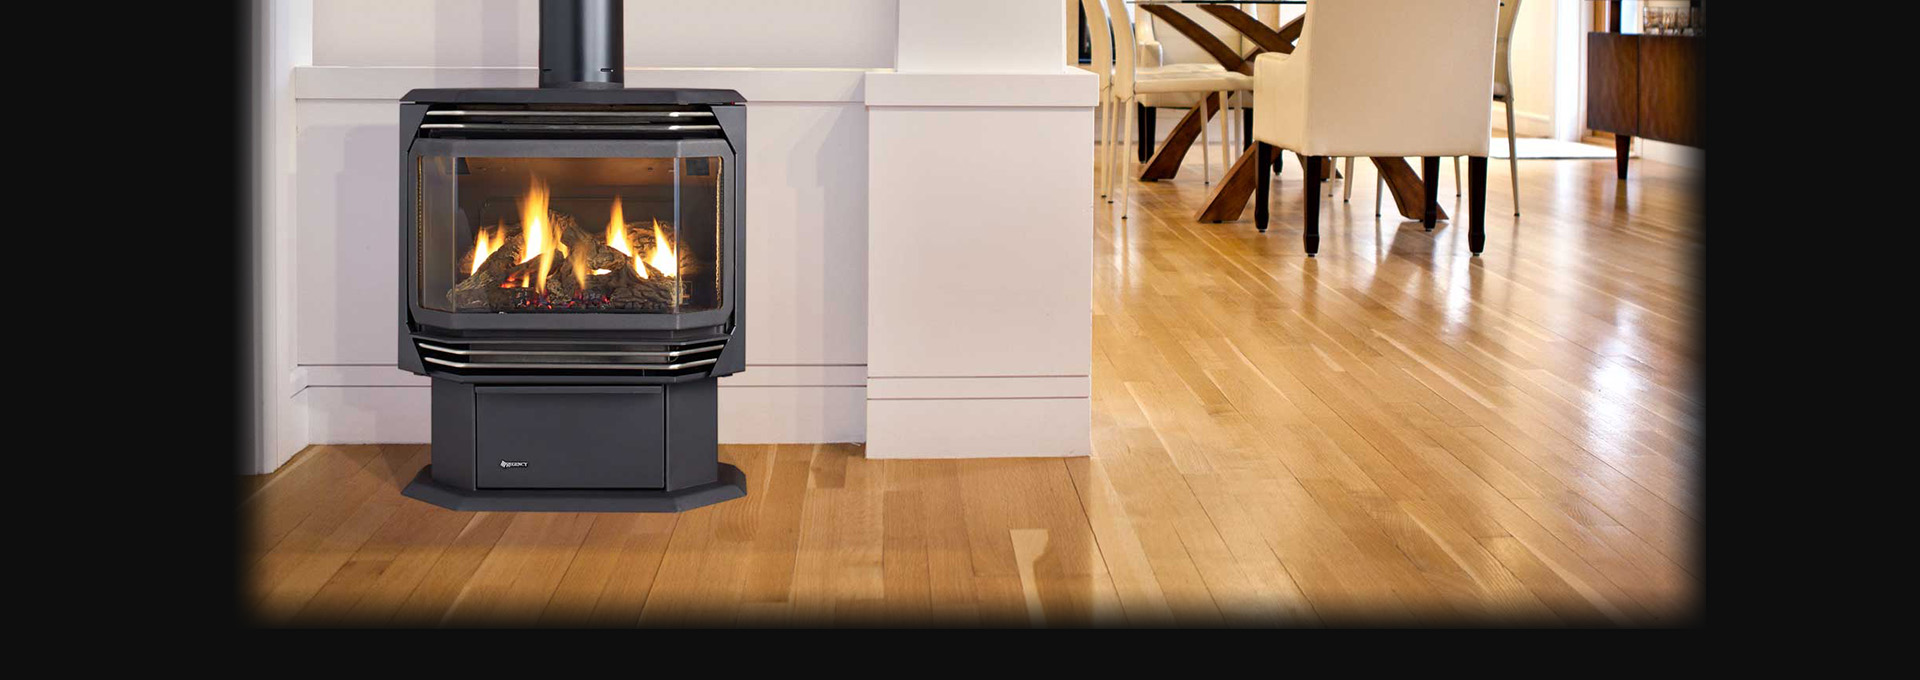 Freestanding Gas Stoves Gas Heating Stoves By Regency